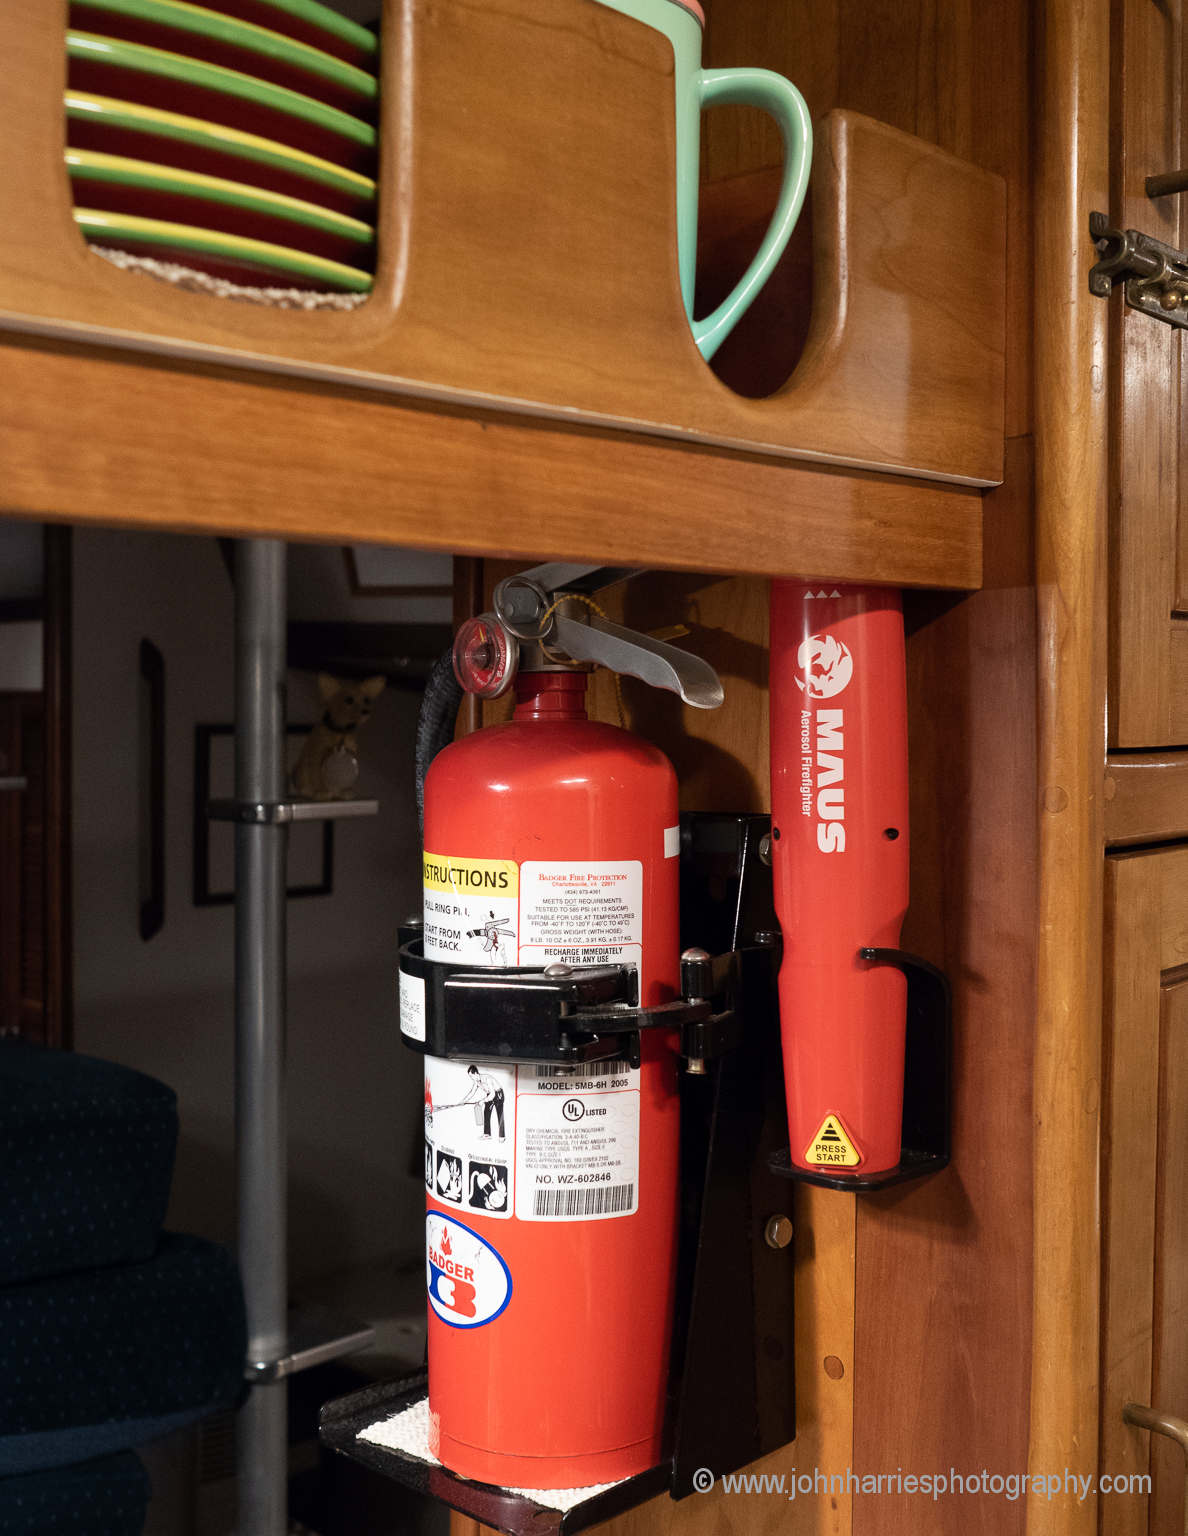 Maus Fire Extinguishers—A Breakthrough?